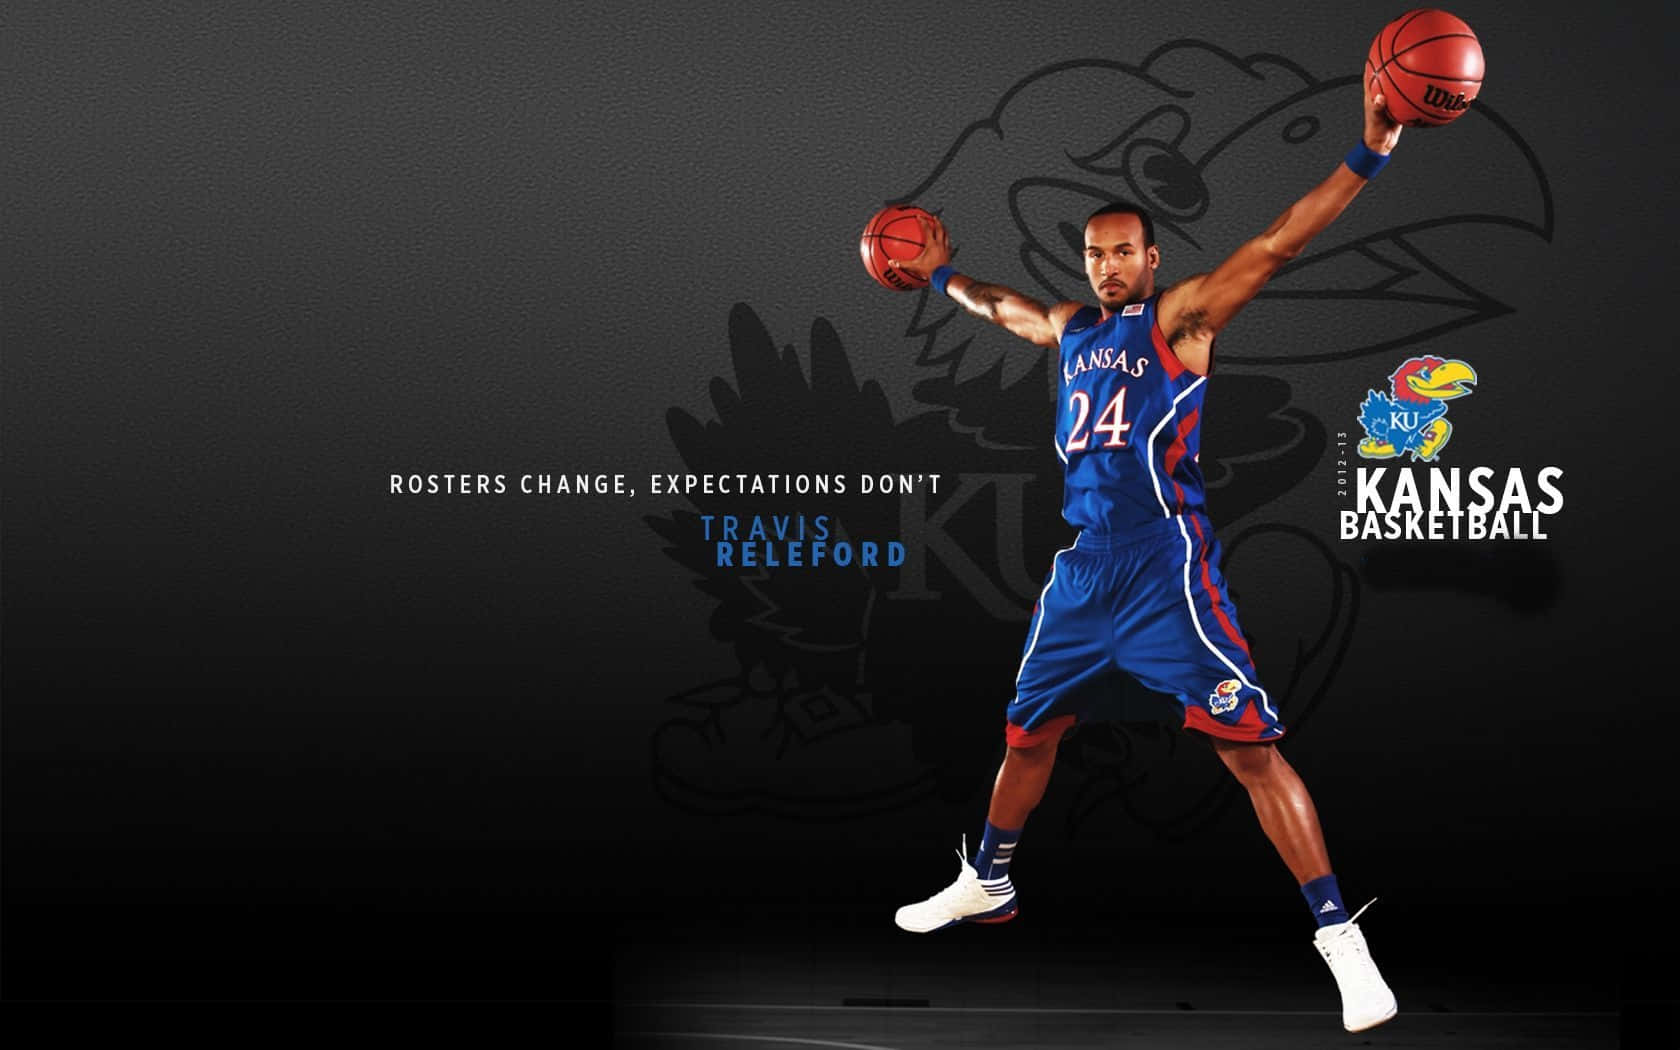 The Kansas Jayhawks pride themselves on their commitment to excellence. Wallpaper